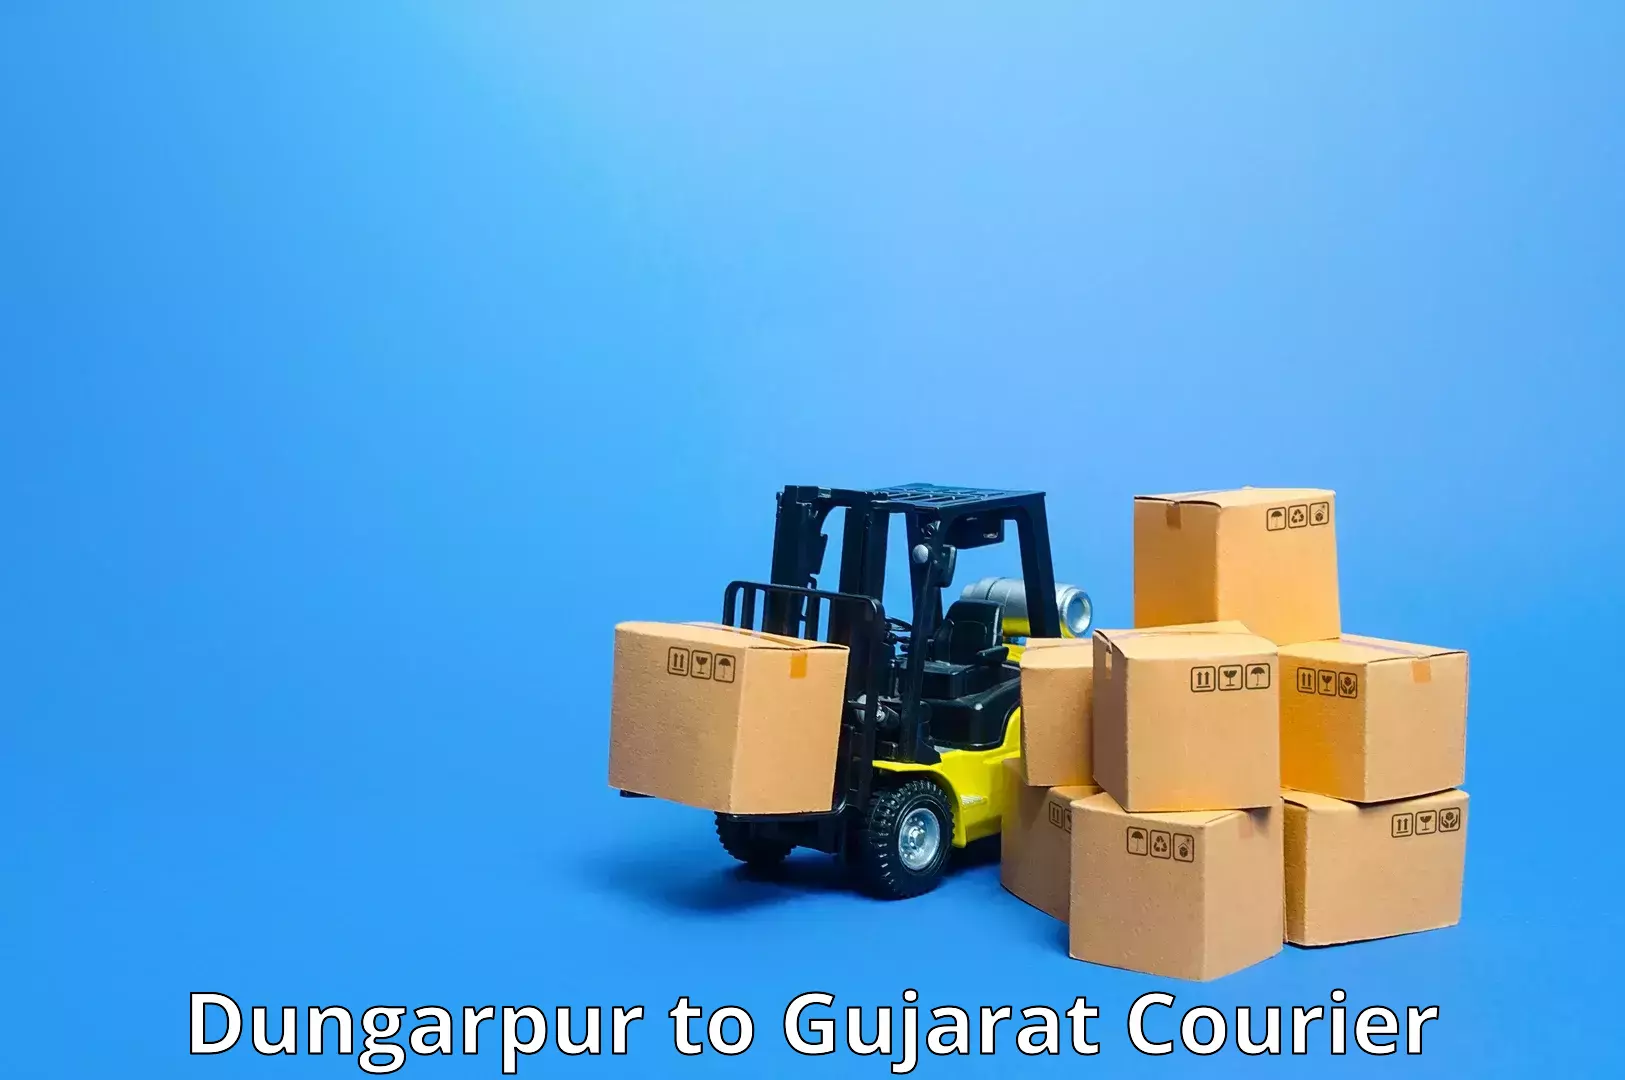 Parcel service for businesses Dungarpur to Dholera